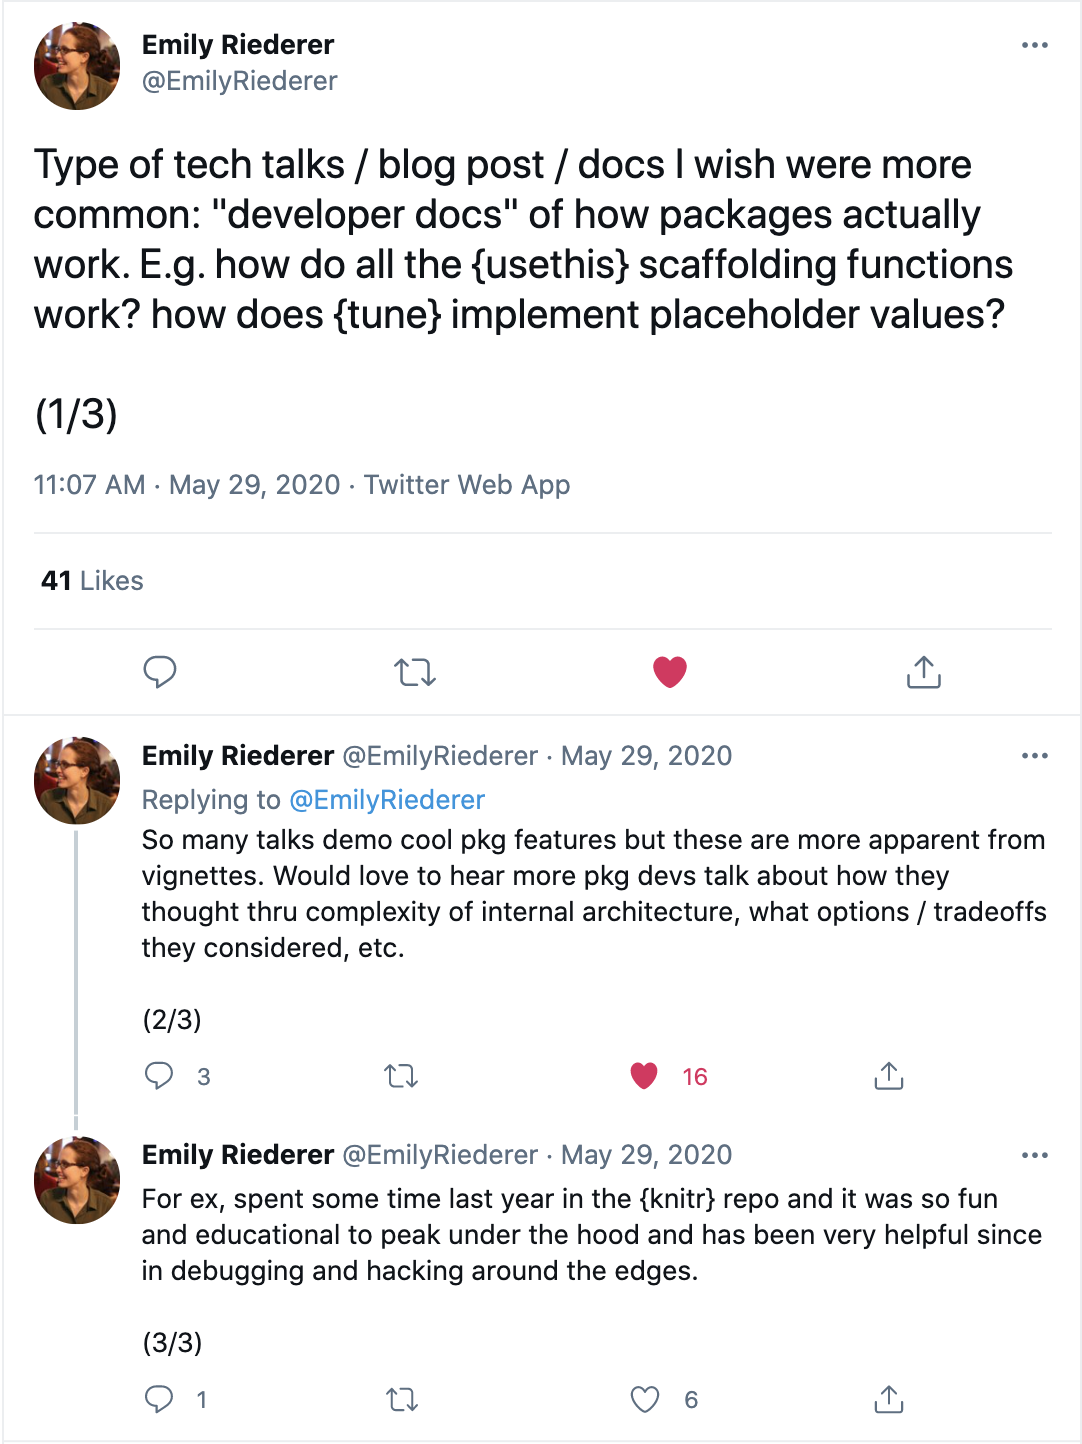 A screenshot of a thread of tweets for Emily Riederer. The thread reads 'Type of tech talks / blog post / docs I wish were more common: developer docs of how packages actually work. e.g. how do all of the usethis scaffolding functions work? How does tune implement placeholder values?'. \ So many talks demo cool pkg features but these are more apparent from vignettes. Would love to hear more pkg devs talk about how they thought thru complexity of internal architecture, what options / tradeoffs they considered, etc. \ For ex, spent some time last year in the knitr repo and it was so fun and educational to peak under the hood and has been very helpful since in debugging and hacking around the edges.